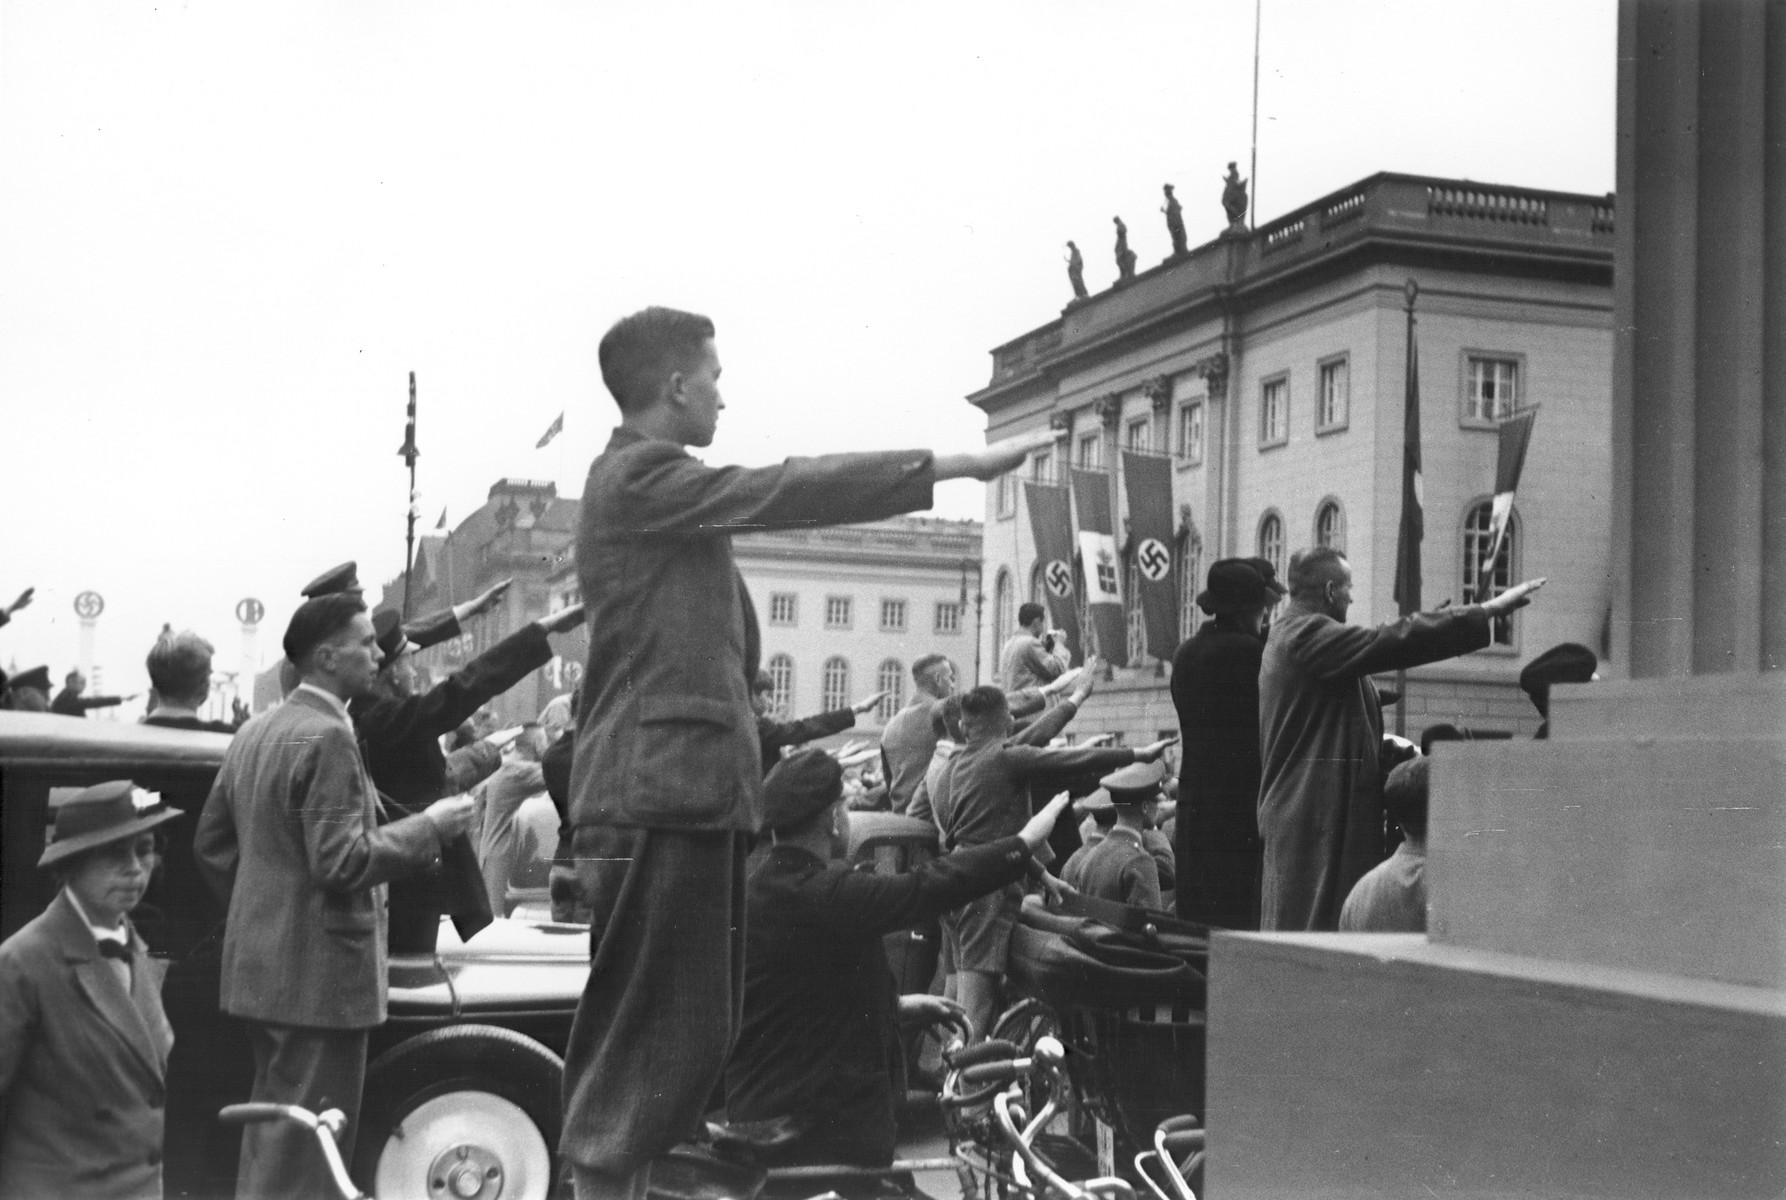 German spectators at a political rally raise their arms in the Nazi salute in Berlin.